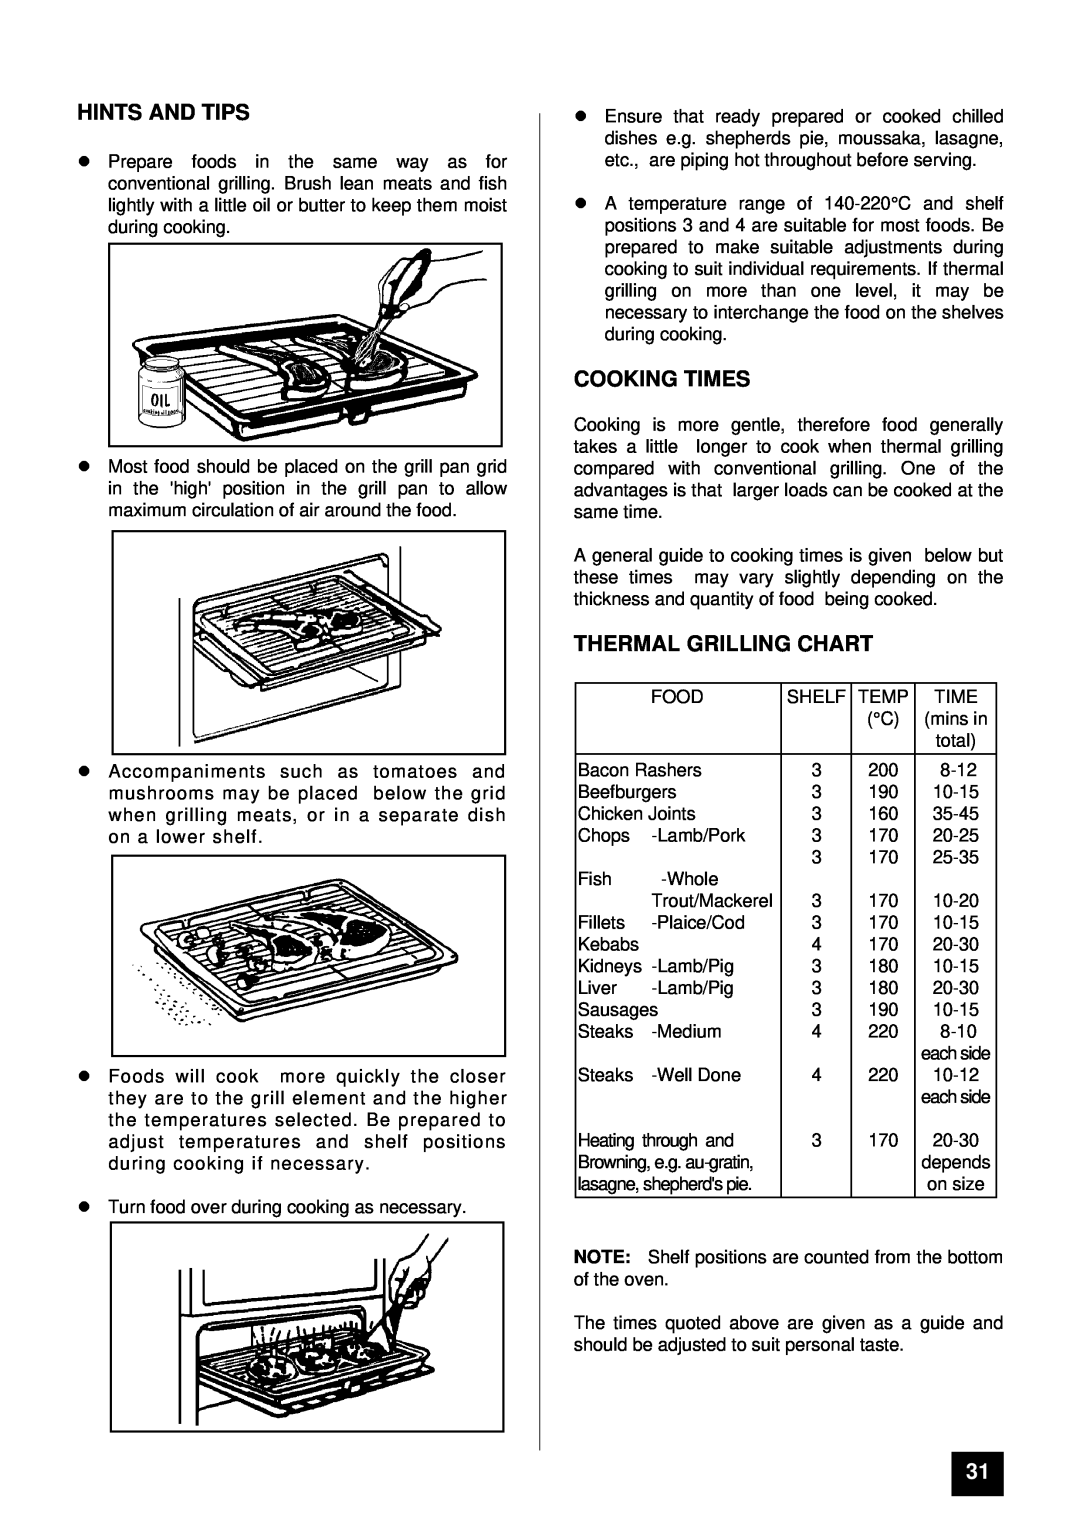 Tricity Bendix BS 611/BS 621 installation instructions Cooking Times, Thermal Grilling Chart, lHINTS AND TIPS 